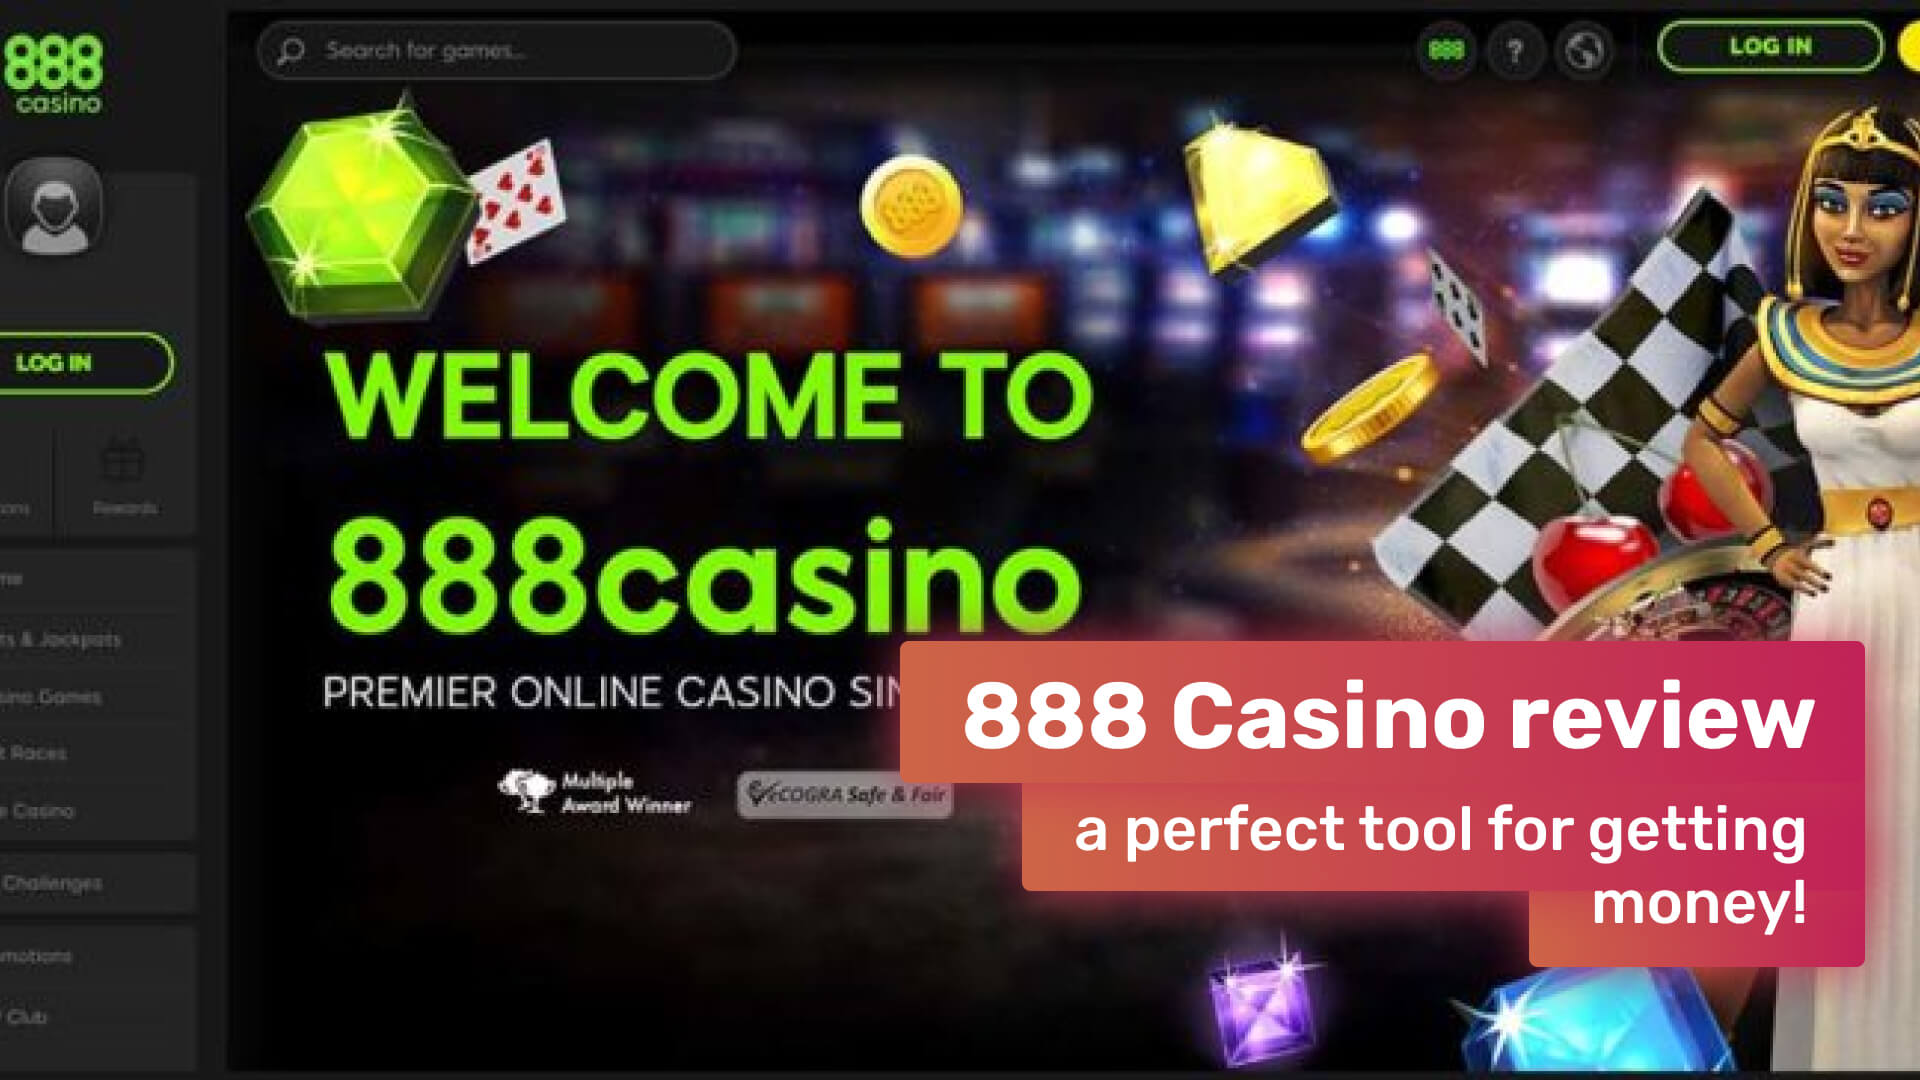 888 Casino review: a perfect tool for getting money!